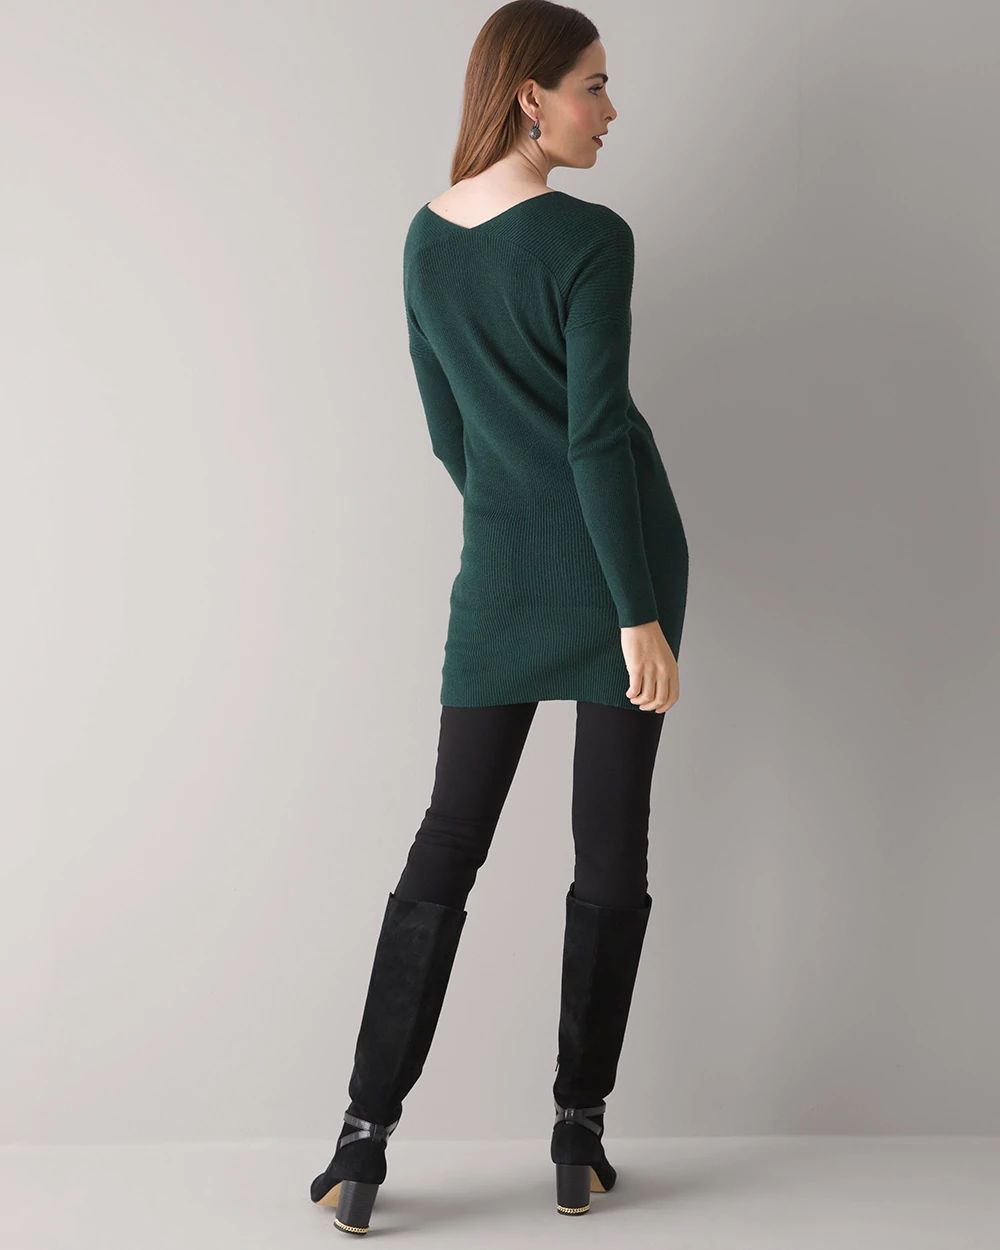 Long Sleeve Ribbed Tunic click to view larger image.